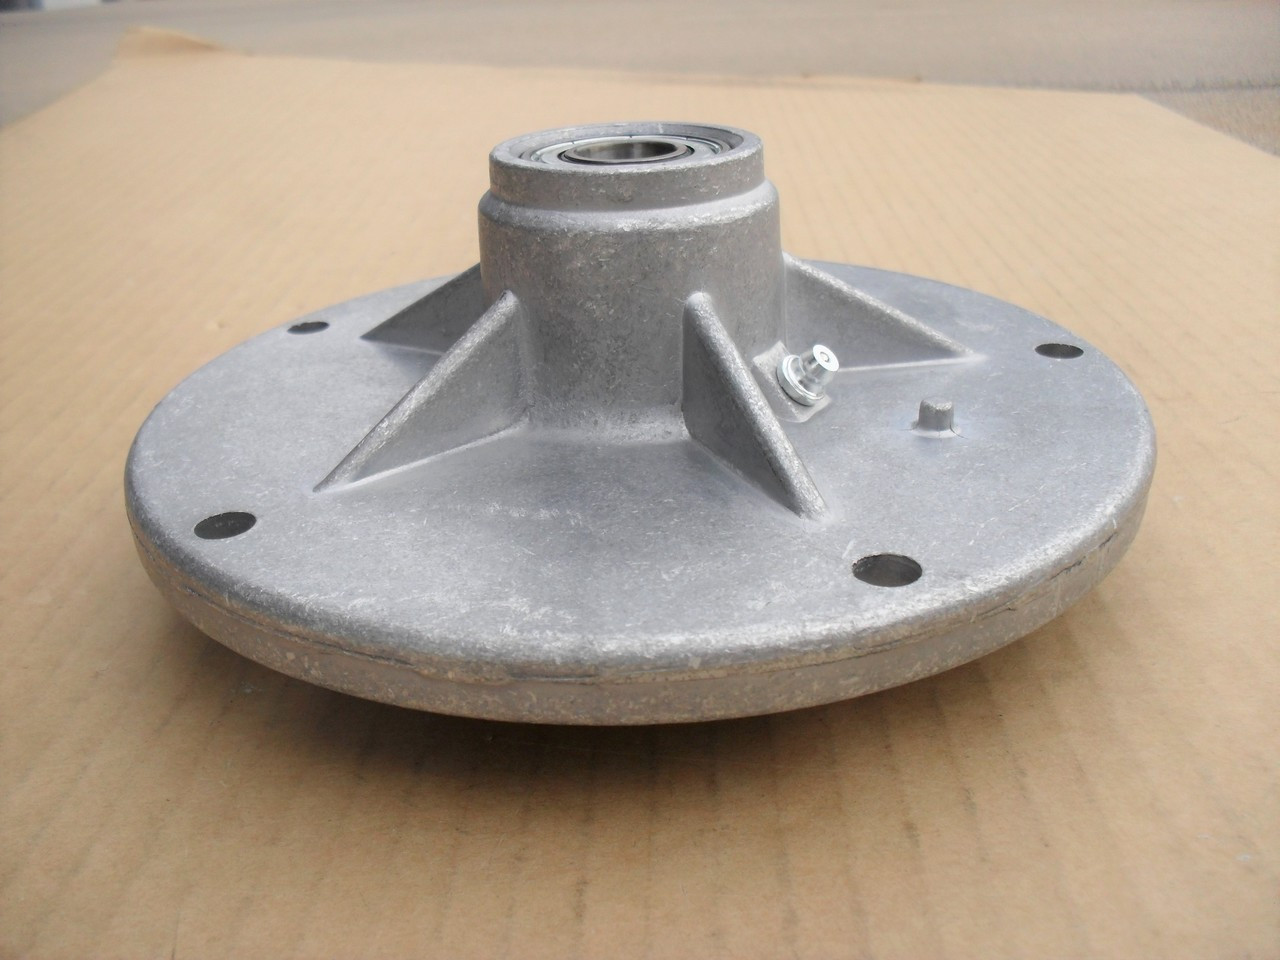 Deck Spindle for Craftsman Murray Scotts 20551 24384 24385 492574 492574MA 90905 92574 1001049